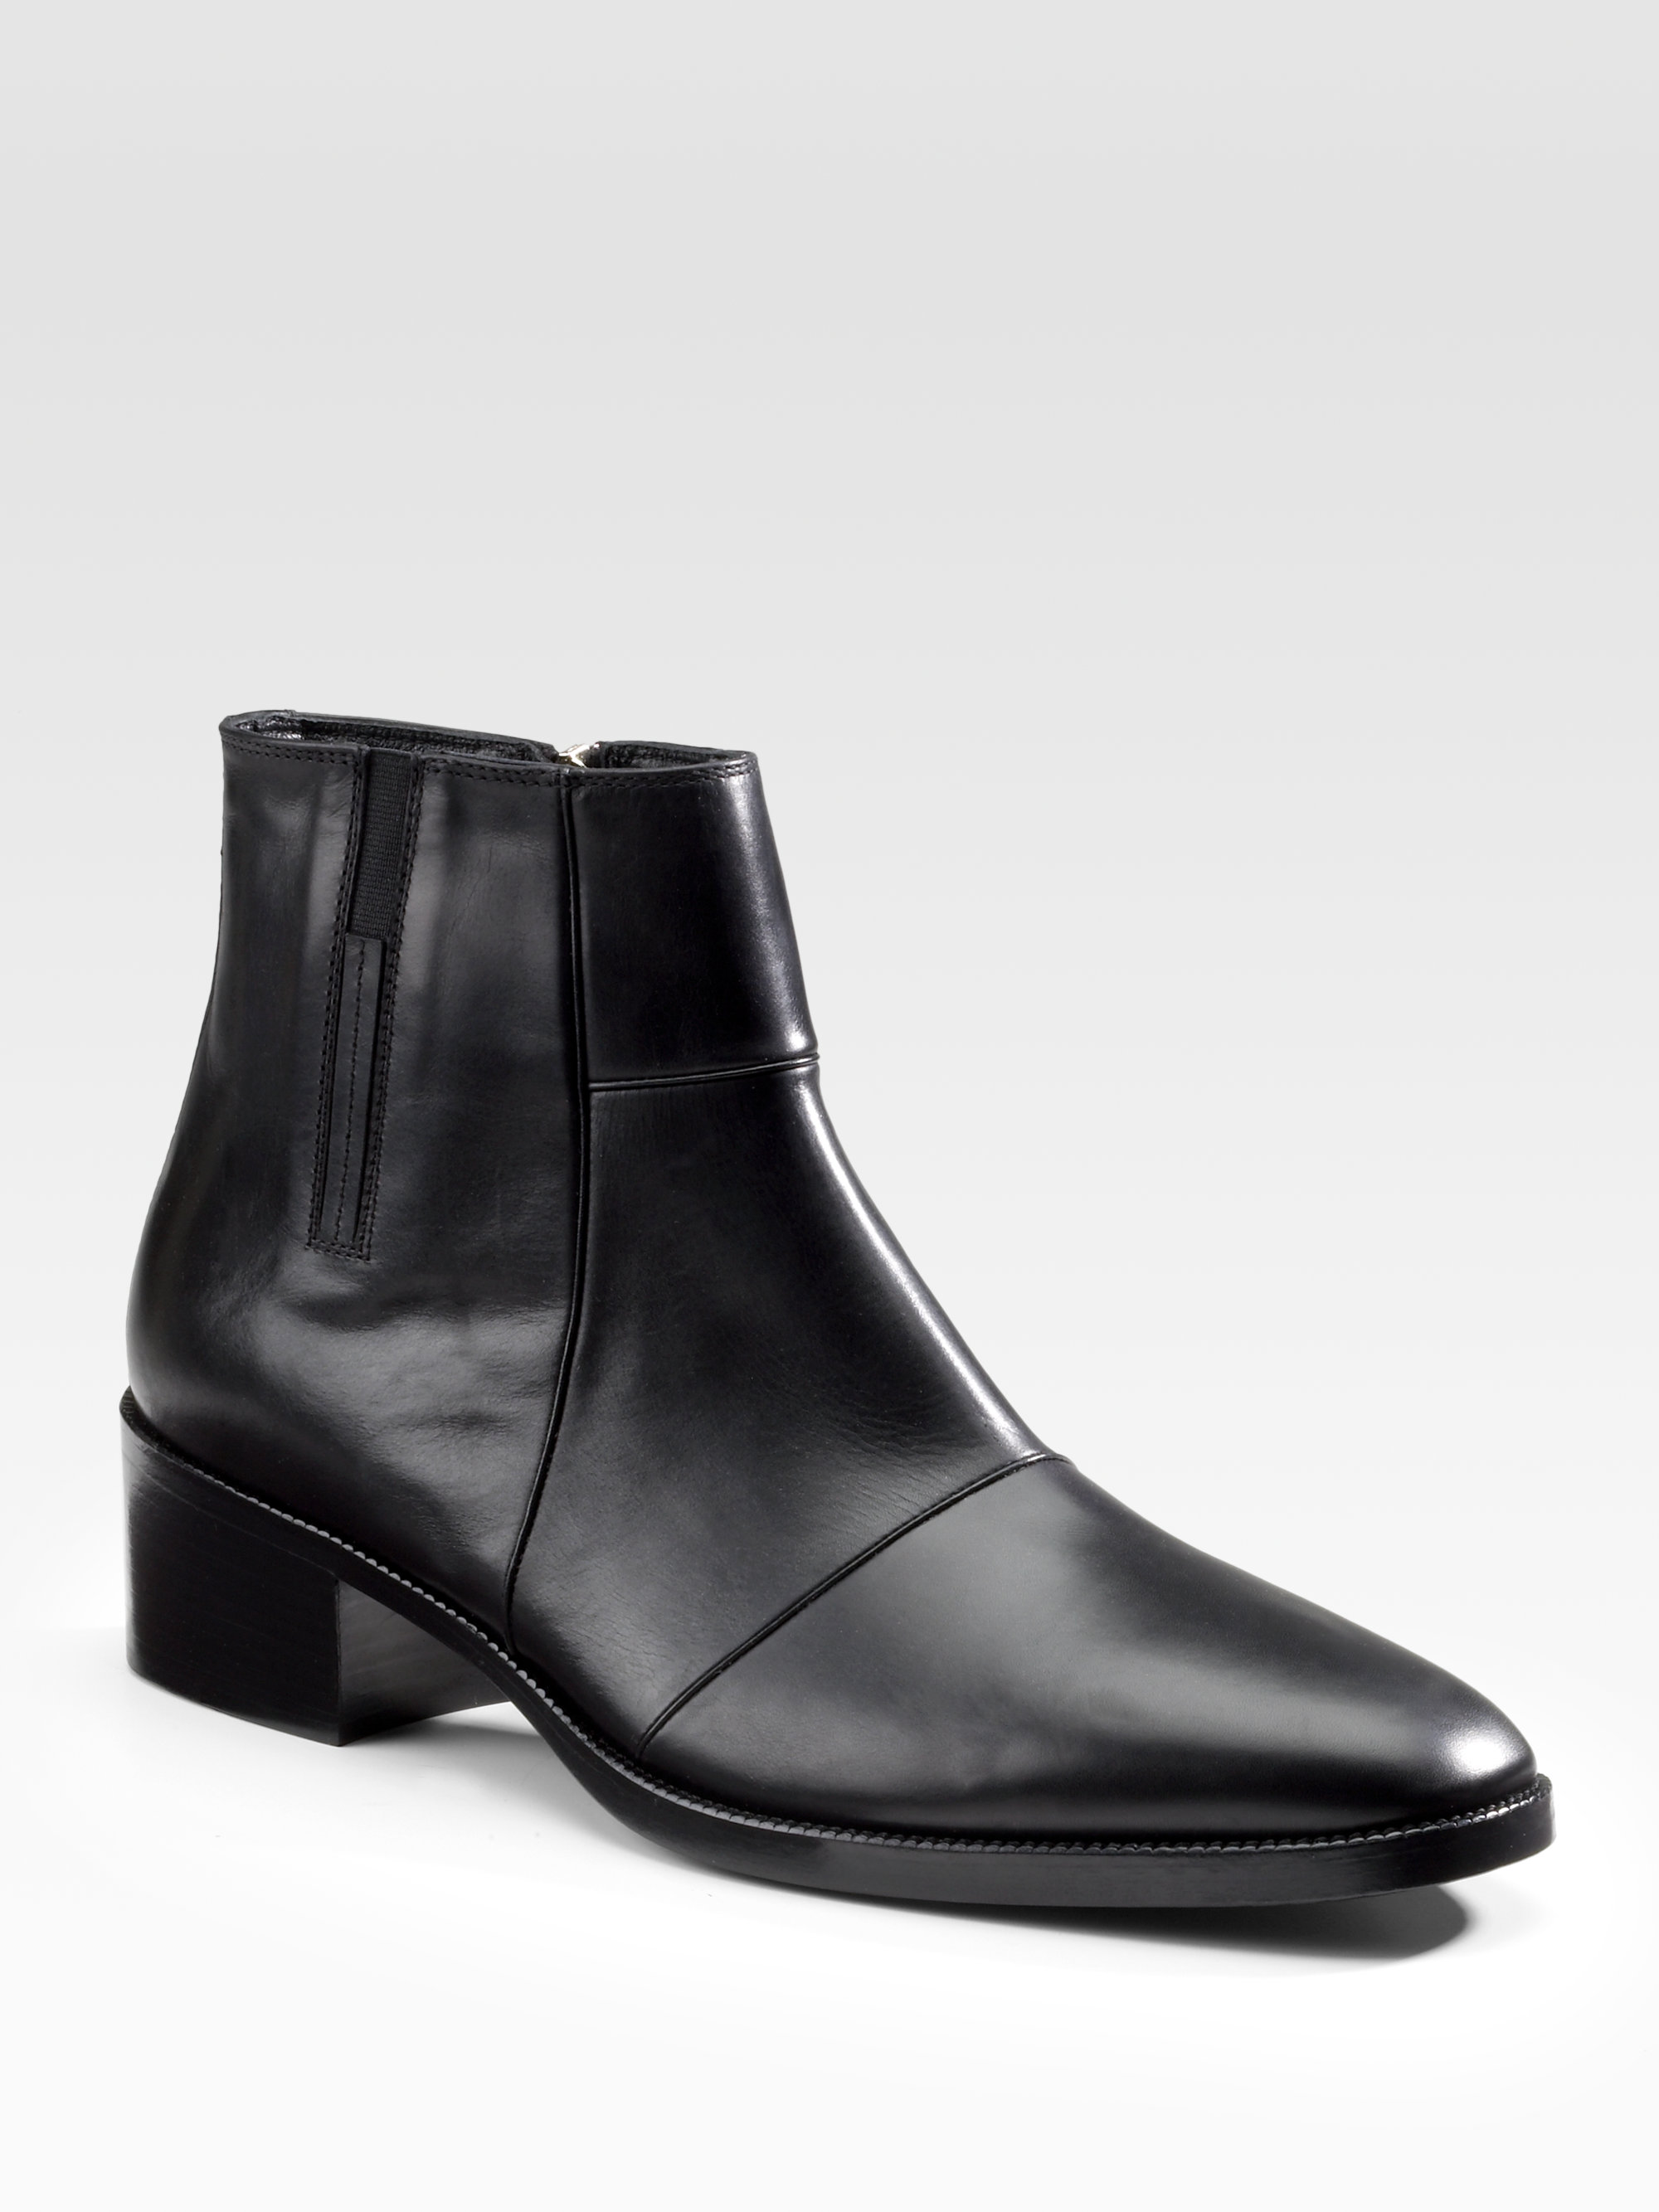 Dior homme Leather Boots in Black for Men | Lyst